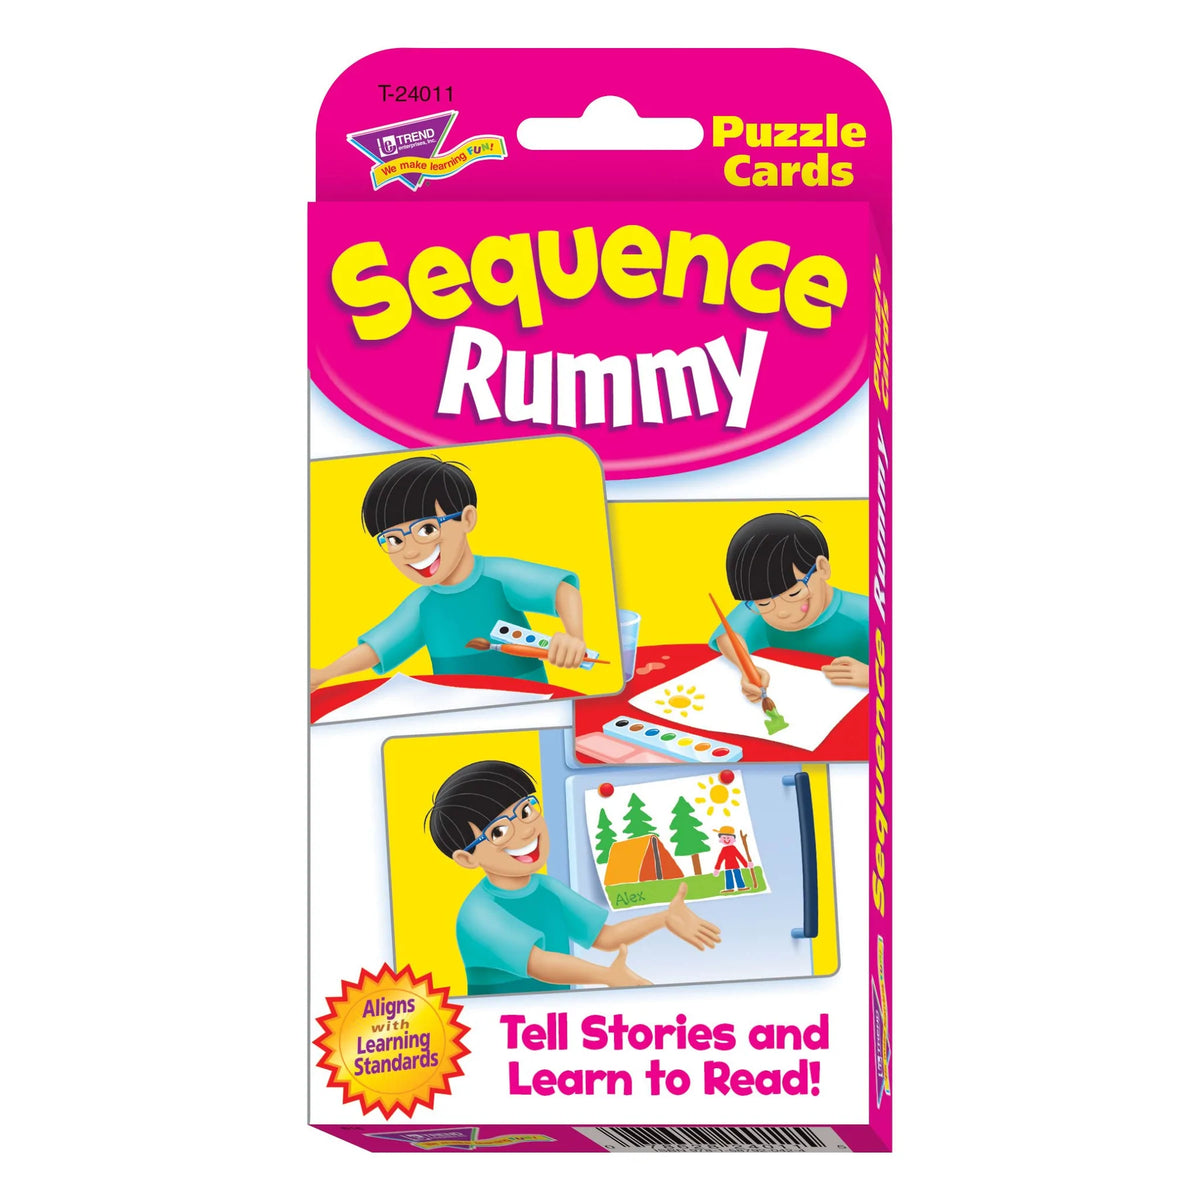 Sequence Rummy Puzzle Cards Cover